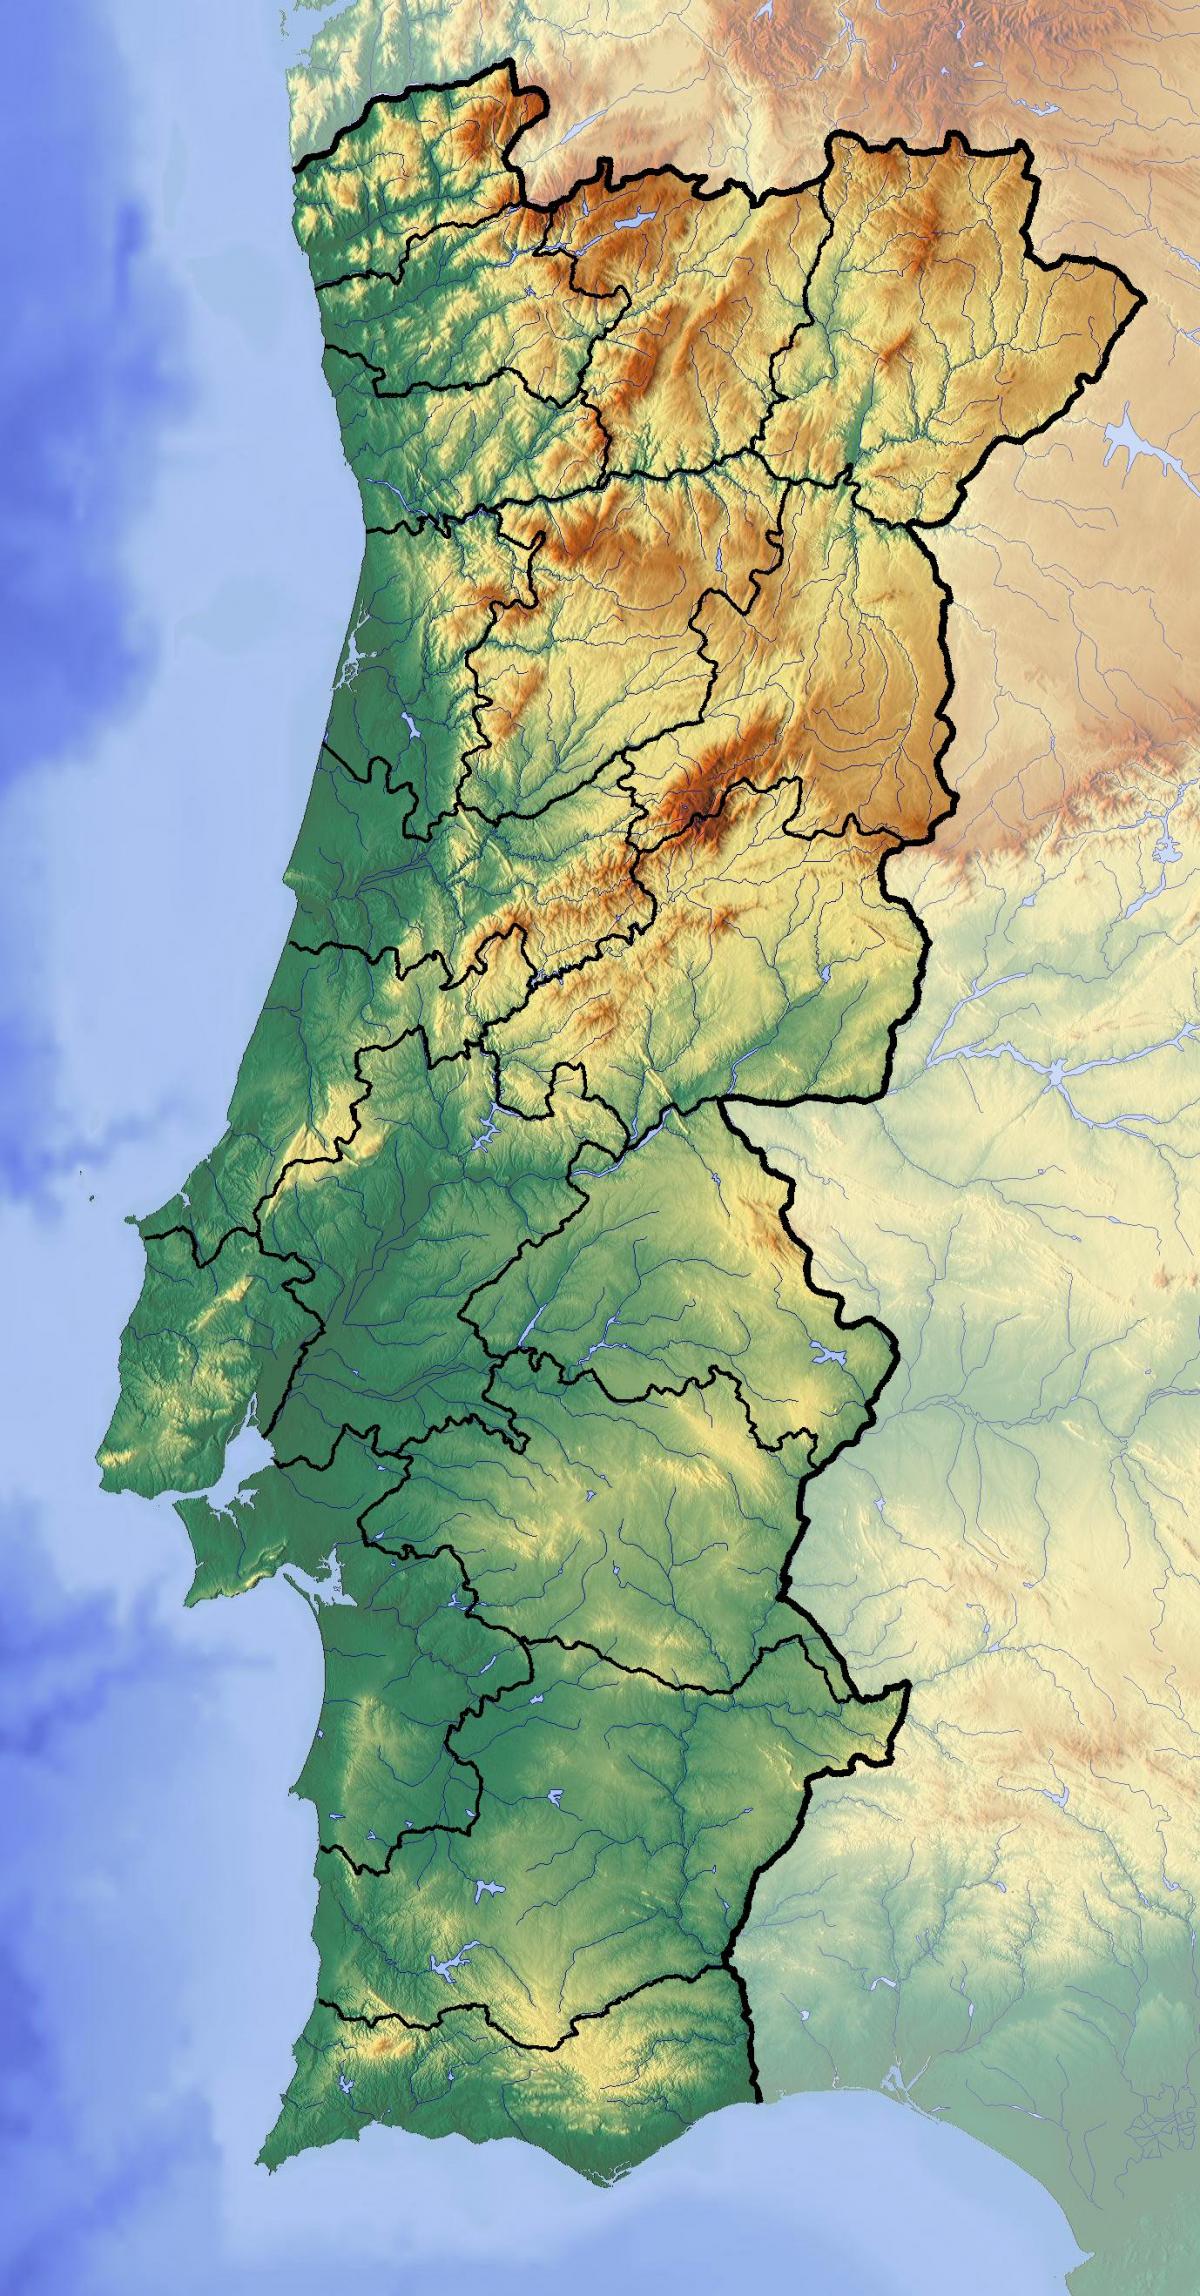 Topographical map of Portugal